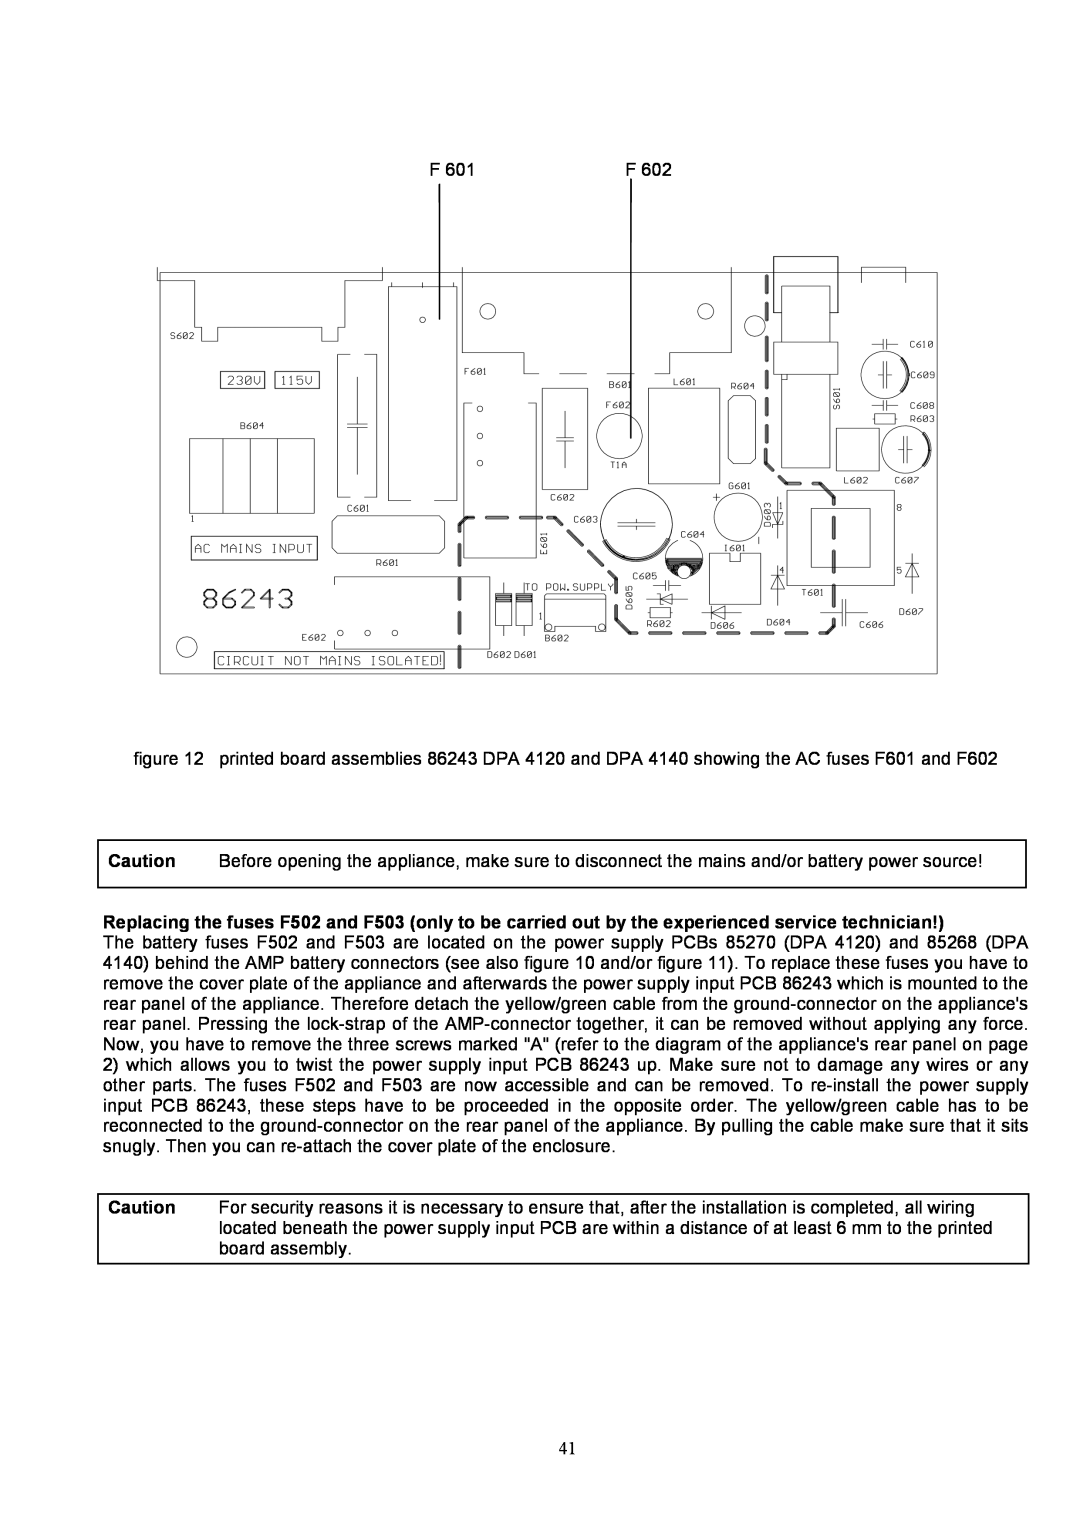 Dynacord owner manual printed board assemblies 86243 DPA 4120 and DPA 4140 showing the AC fuses F601 and F602 